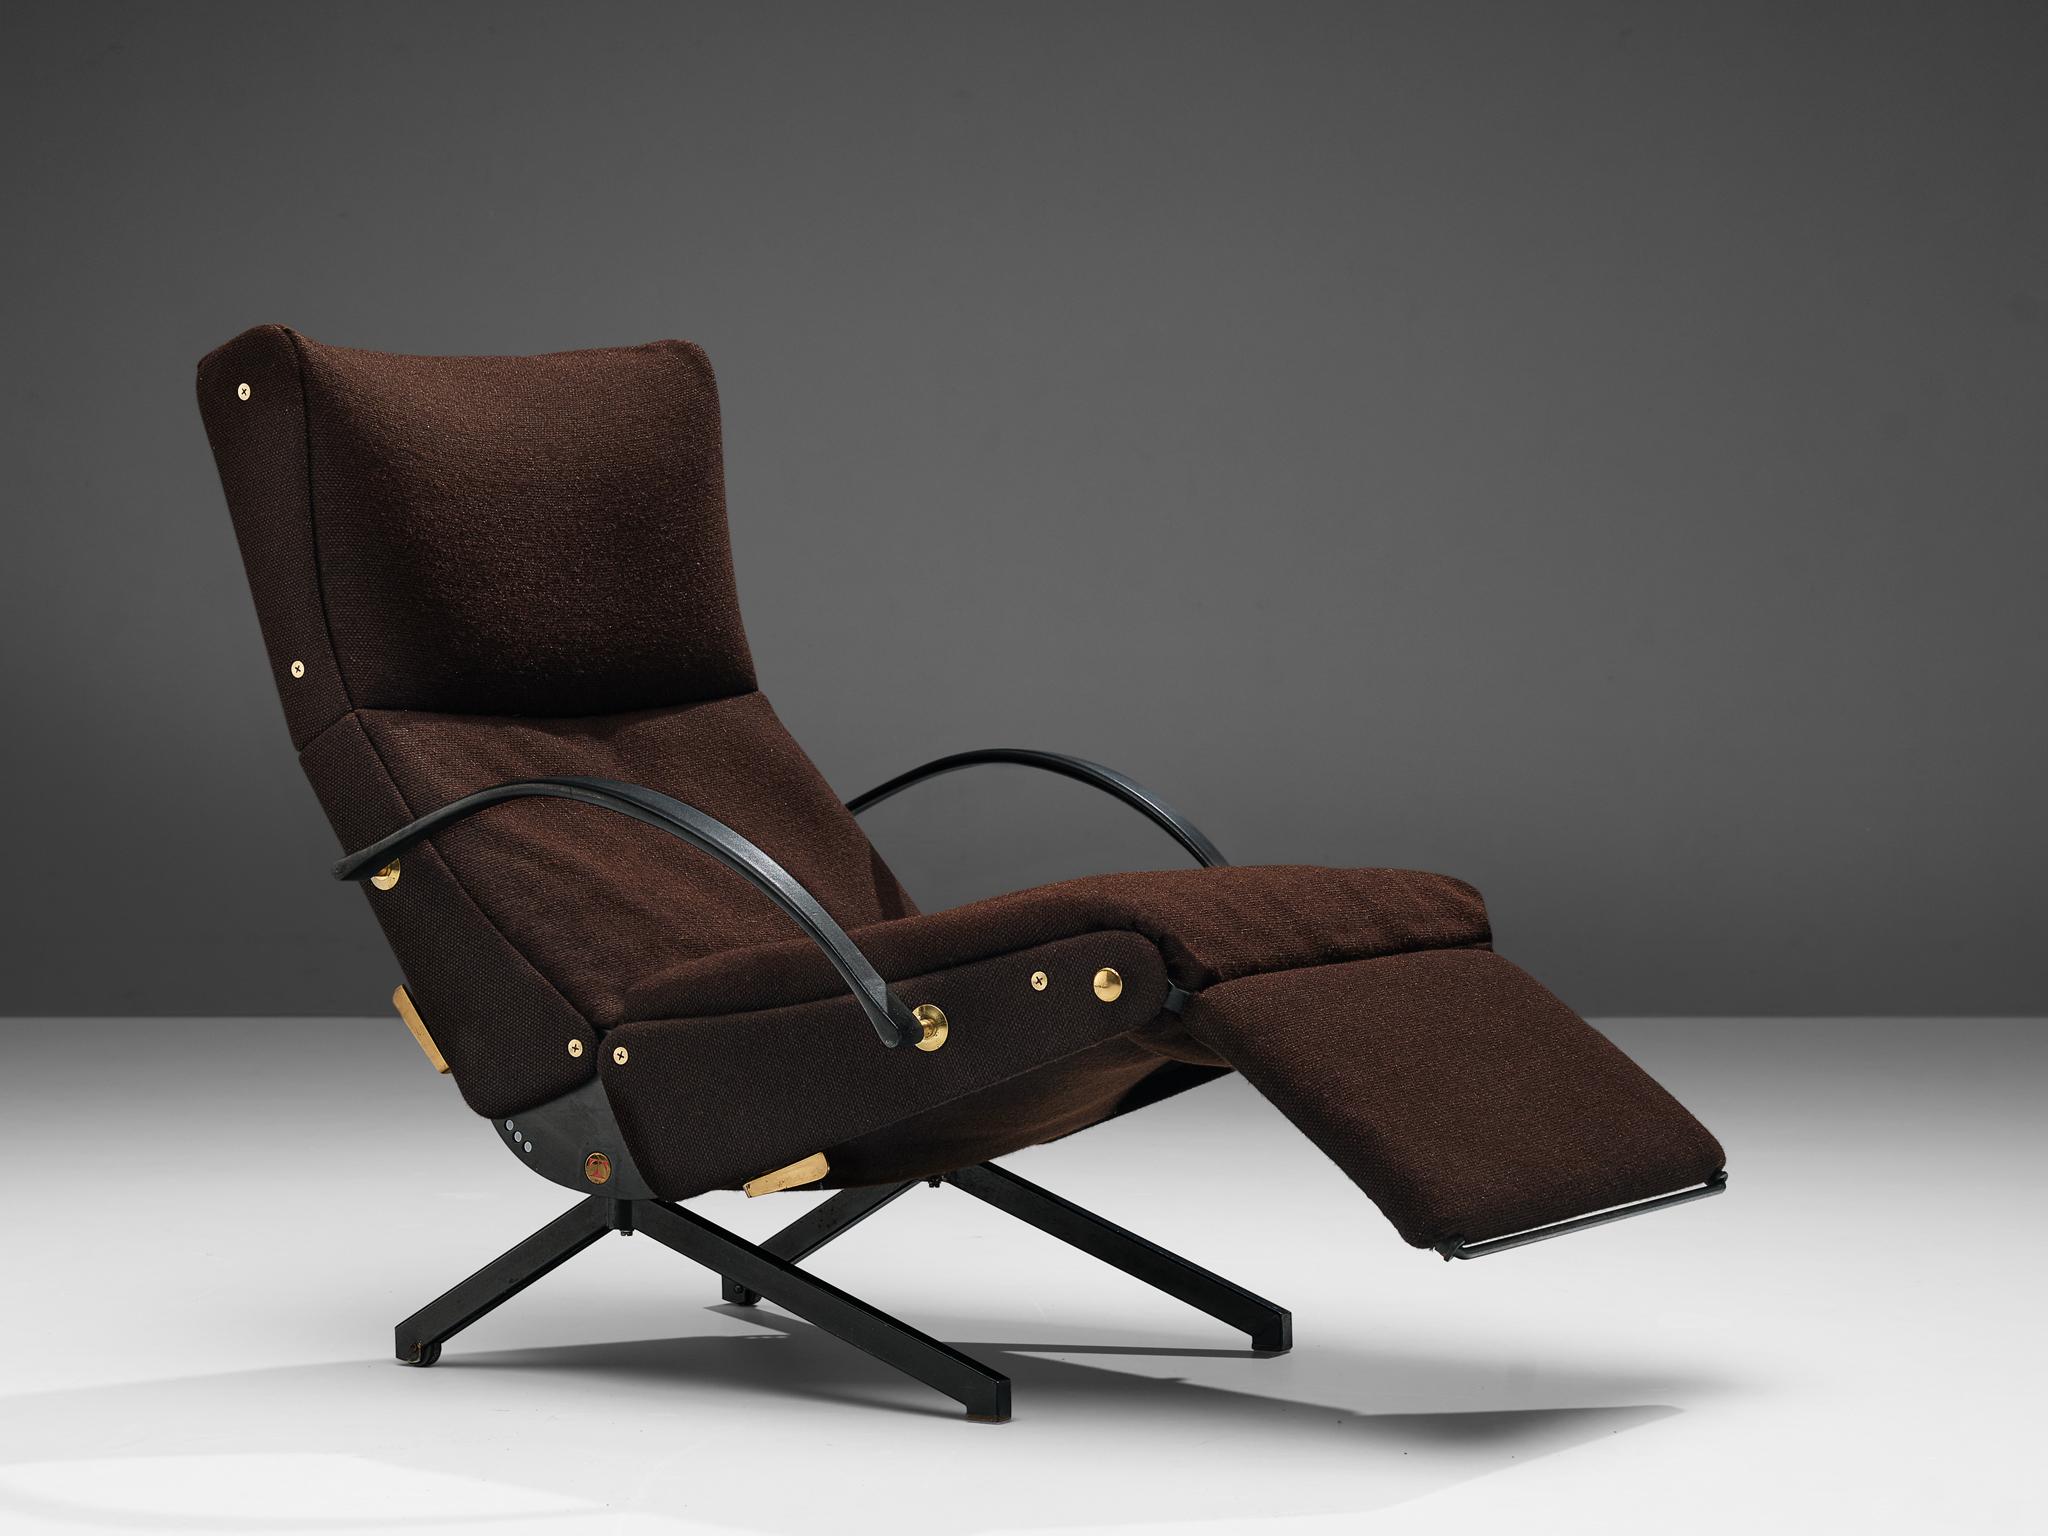 Osvaldo Borsani for Tecno, P40 lounge chair, original brown fabric, metal, Italy, 1955.

This lounge chair has been the result of the relentless search for an armchair that facilitated maximum relaxation. This search was in line with other modernist